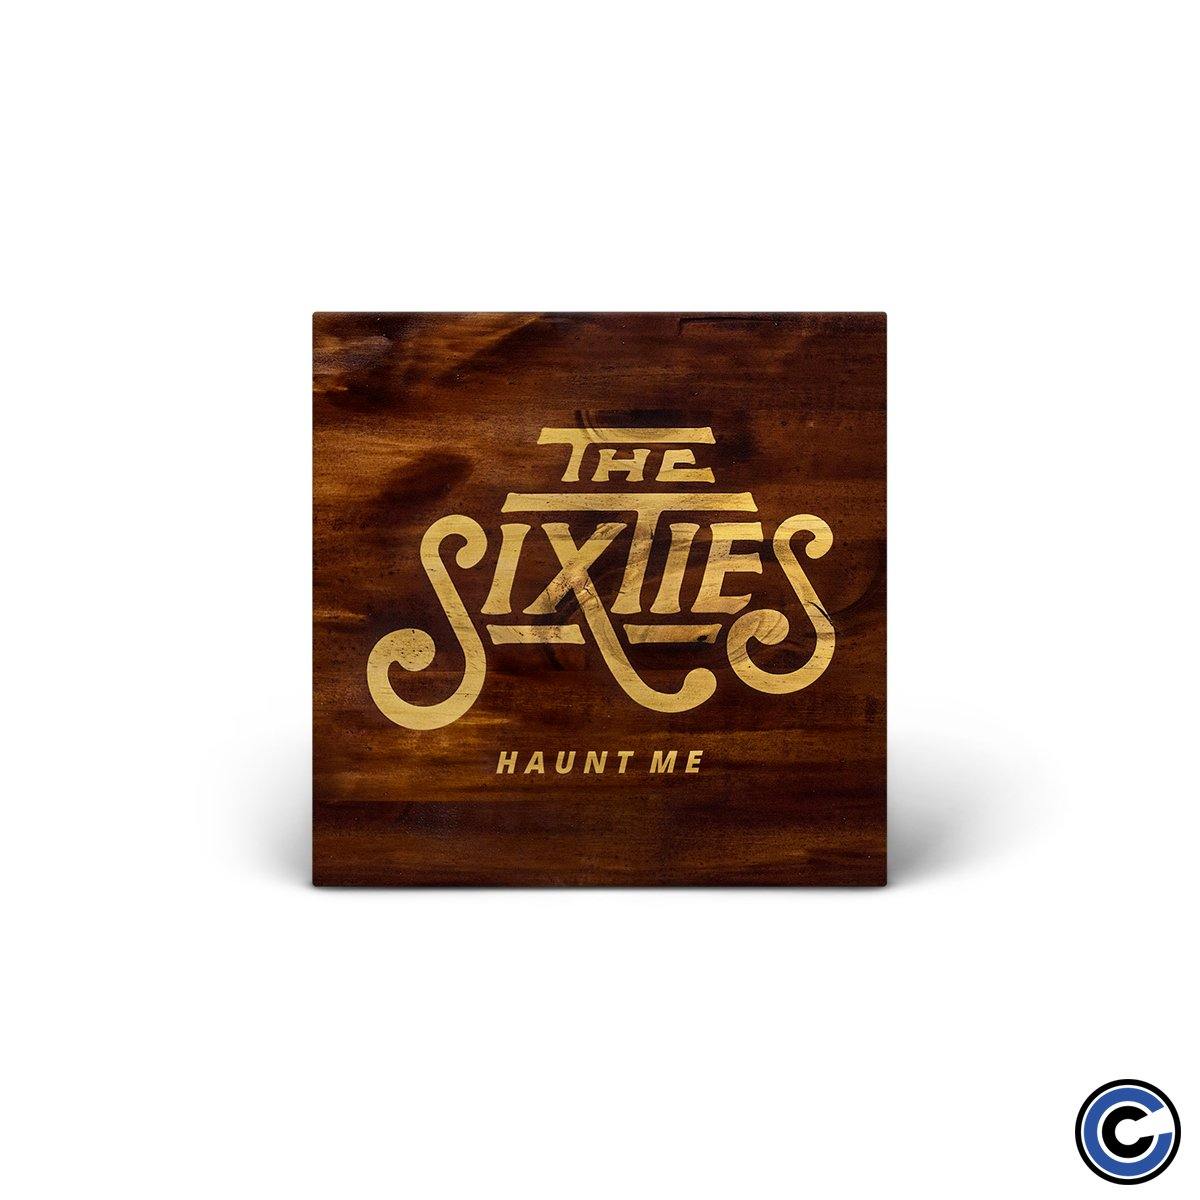 Buy – The Sixties "Haunt Me" CD – Band & Music Merch – Cold Cuts Merch